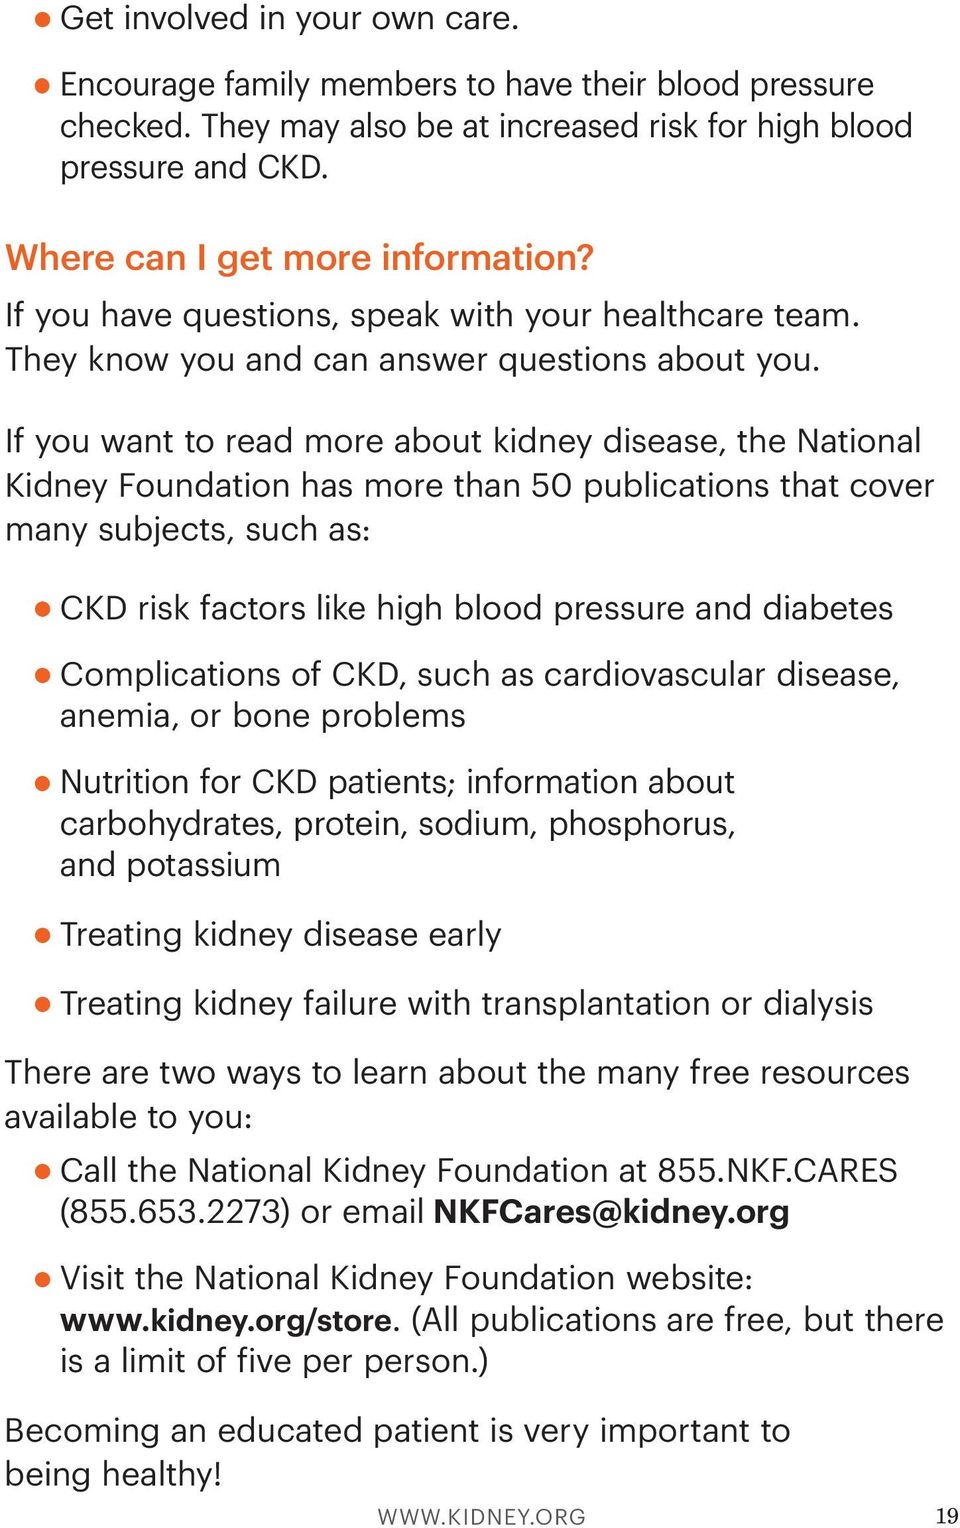 If you want to read more about kidney disease, the National Kidney Foundation has more than 50 publications that cover many subjects, such as: CKD risk factors like high blood pressure and diabetes